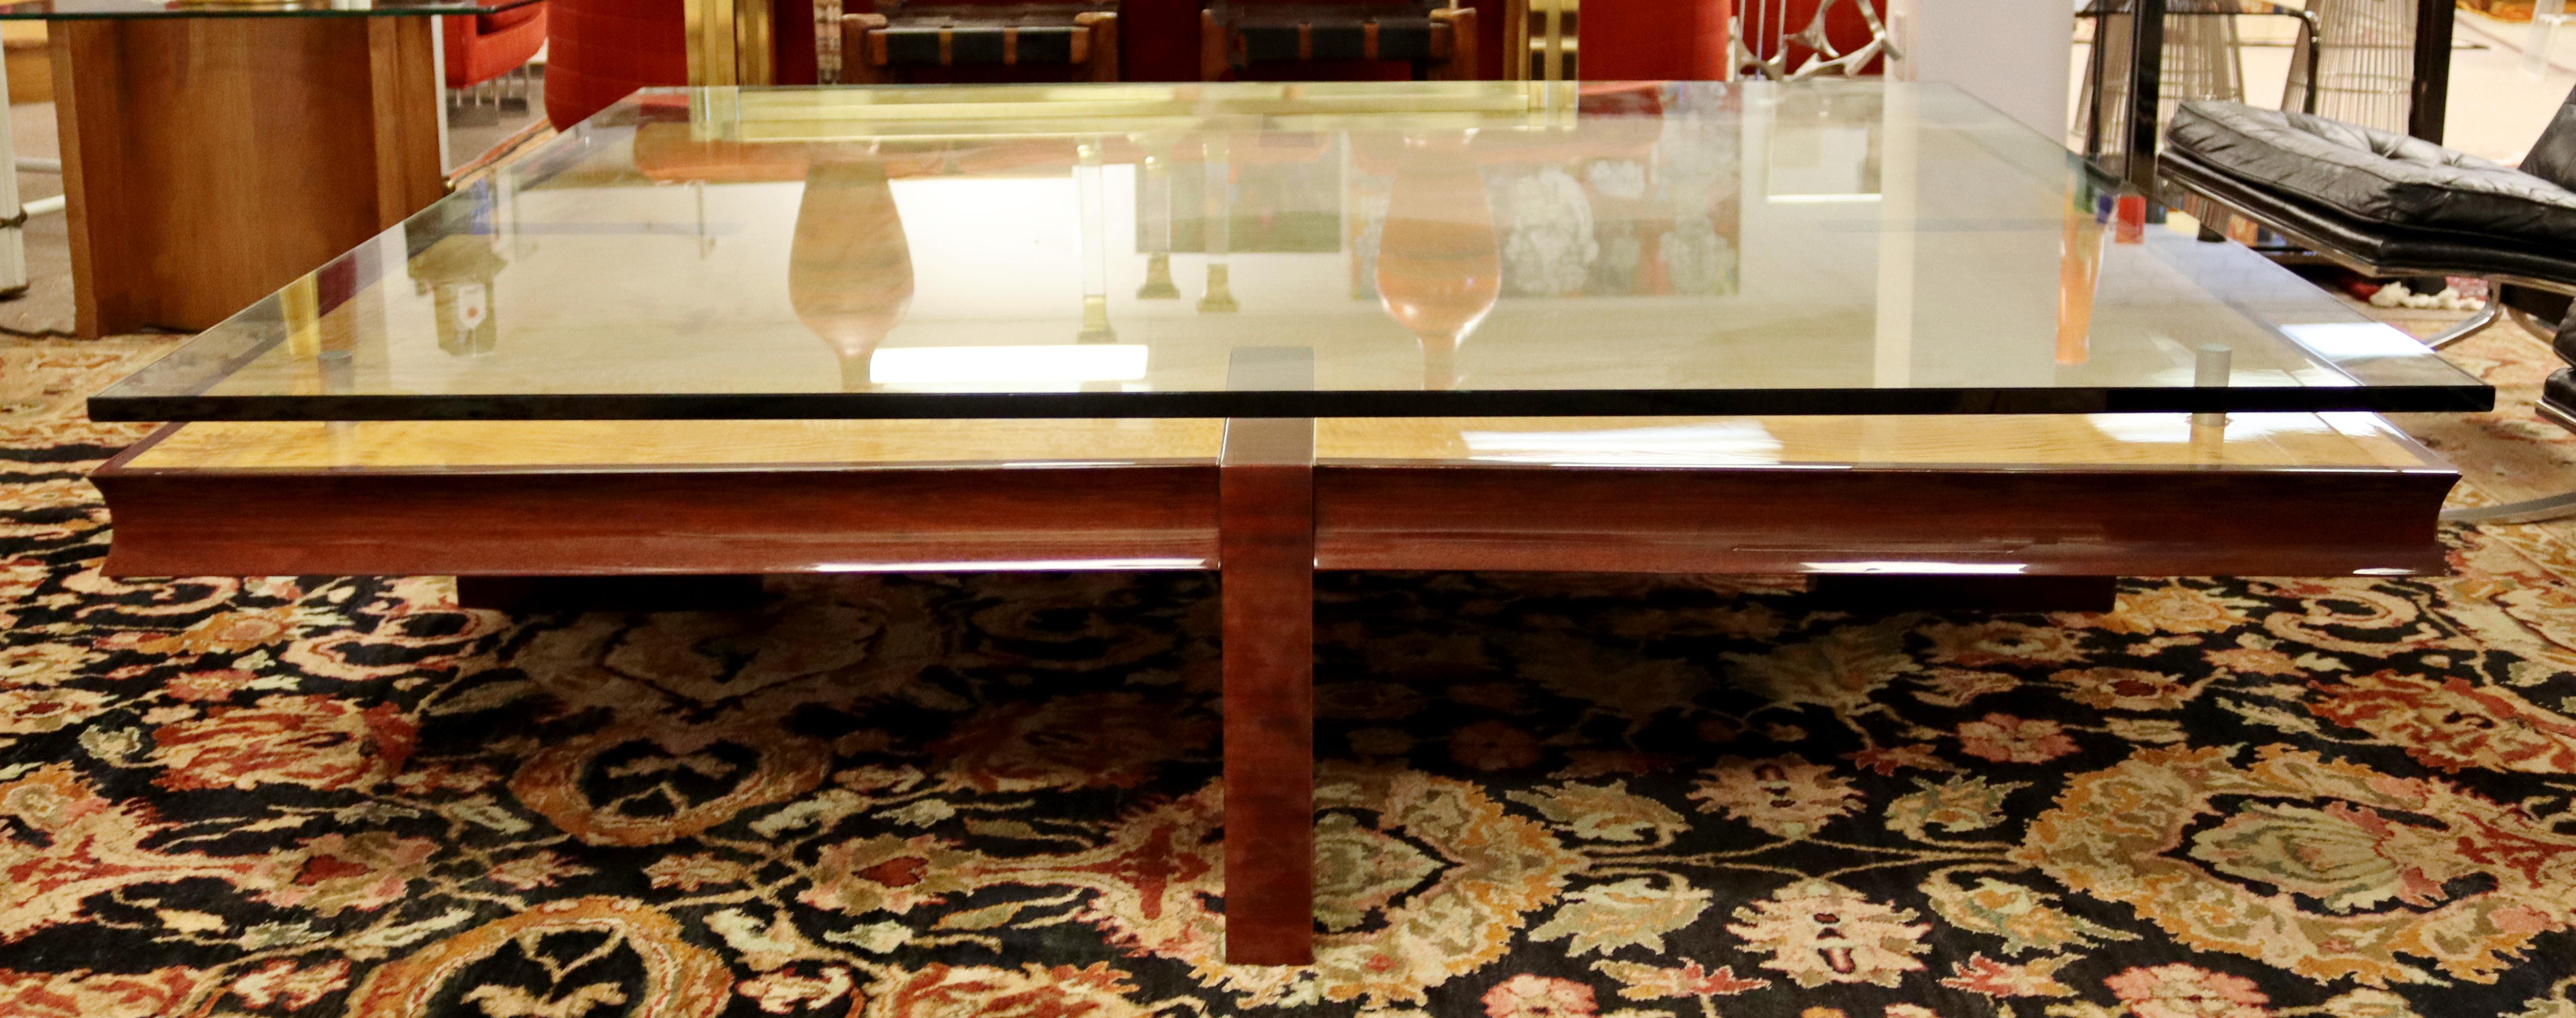 For your consideration is a stupendous and massive, square coffee table, made of burlwood and with a floating glass top, circa the 1980s. In excellent vintage condition, but with a few nicks in the wood. The dimensions are 66